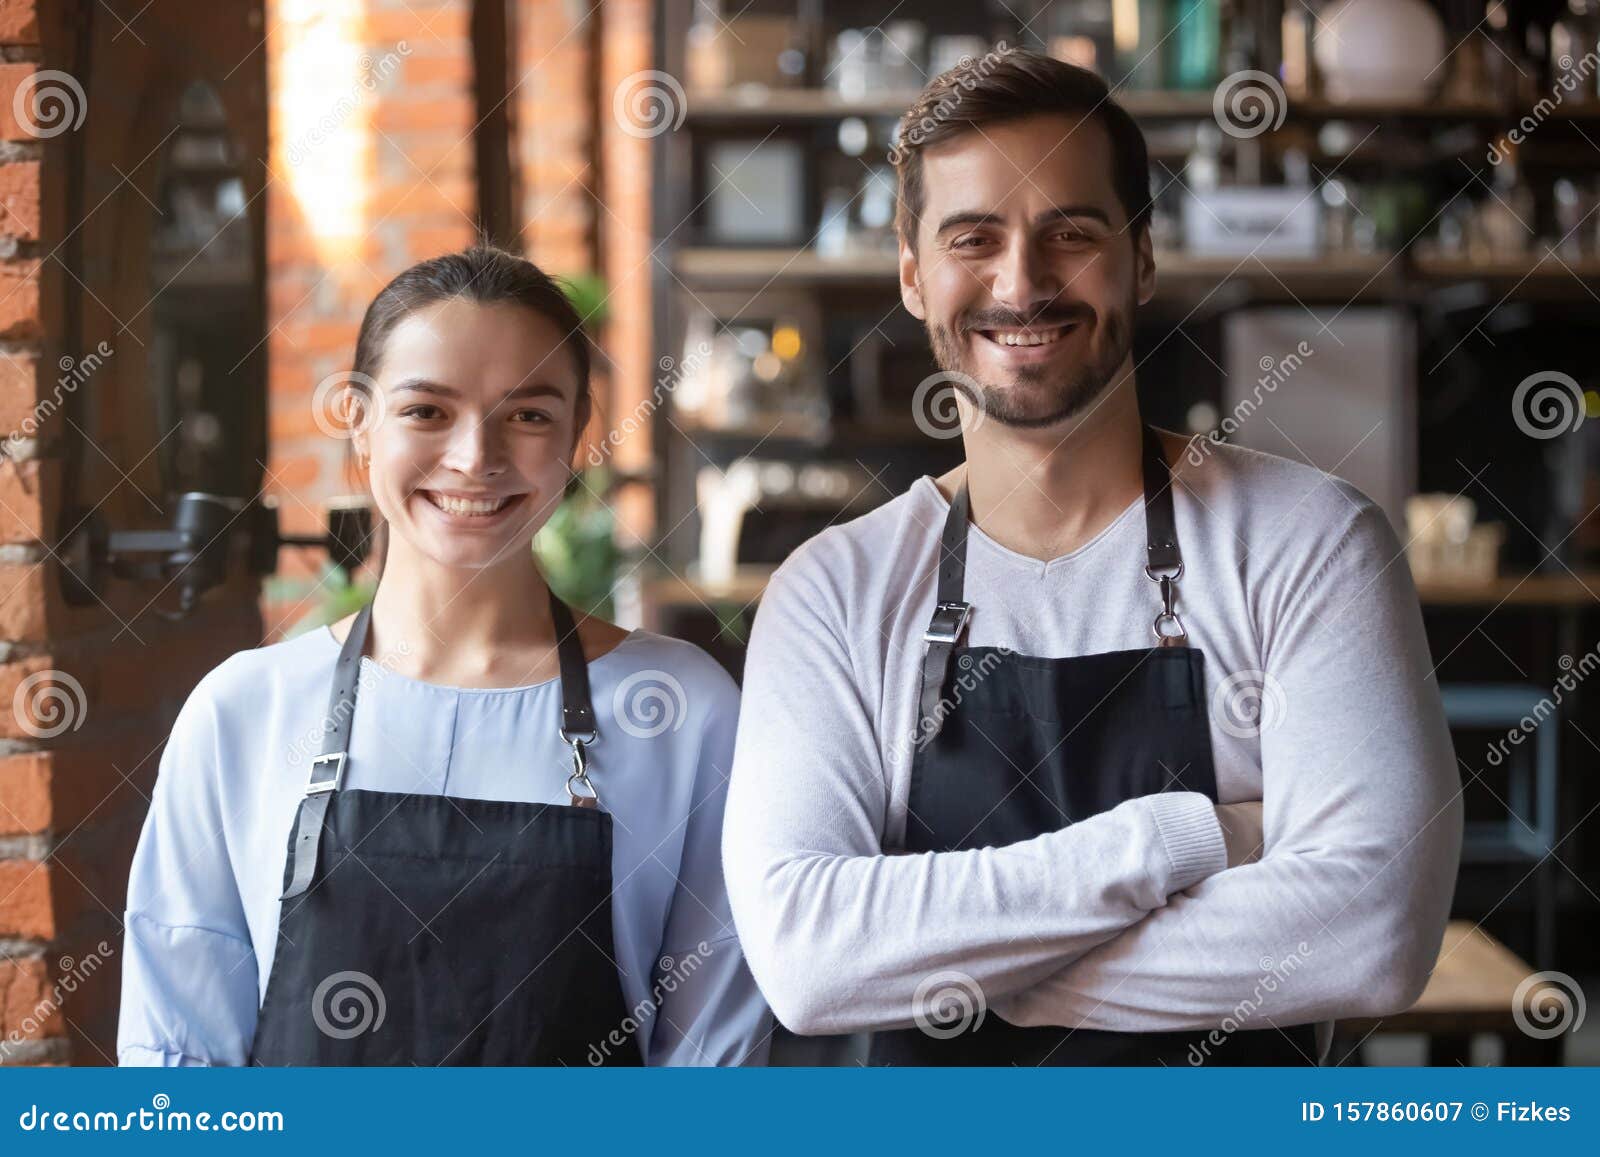 head shot portrait of coffeehouse workers, smiling waiter and waitress